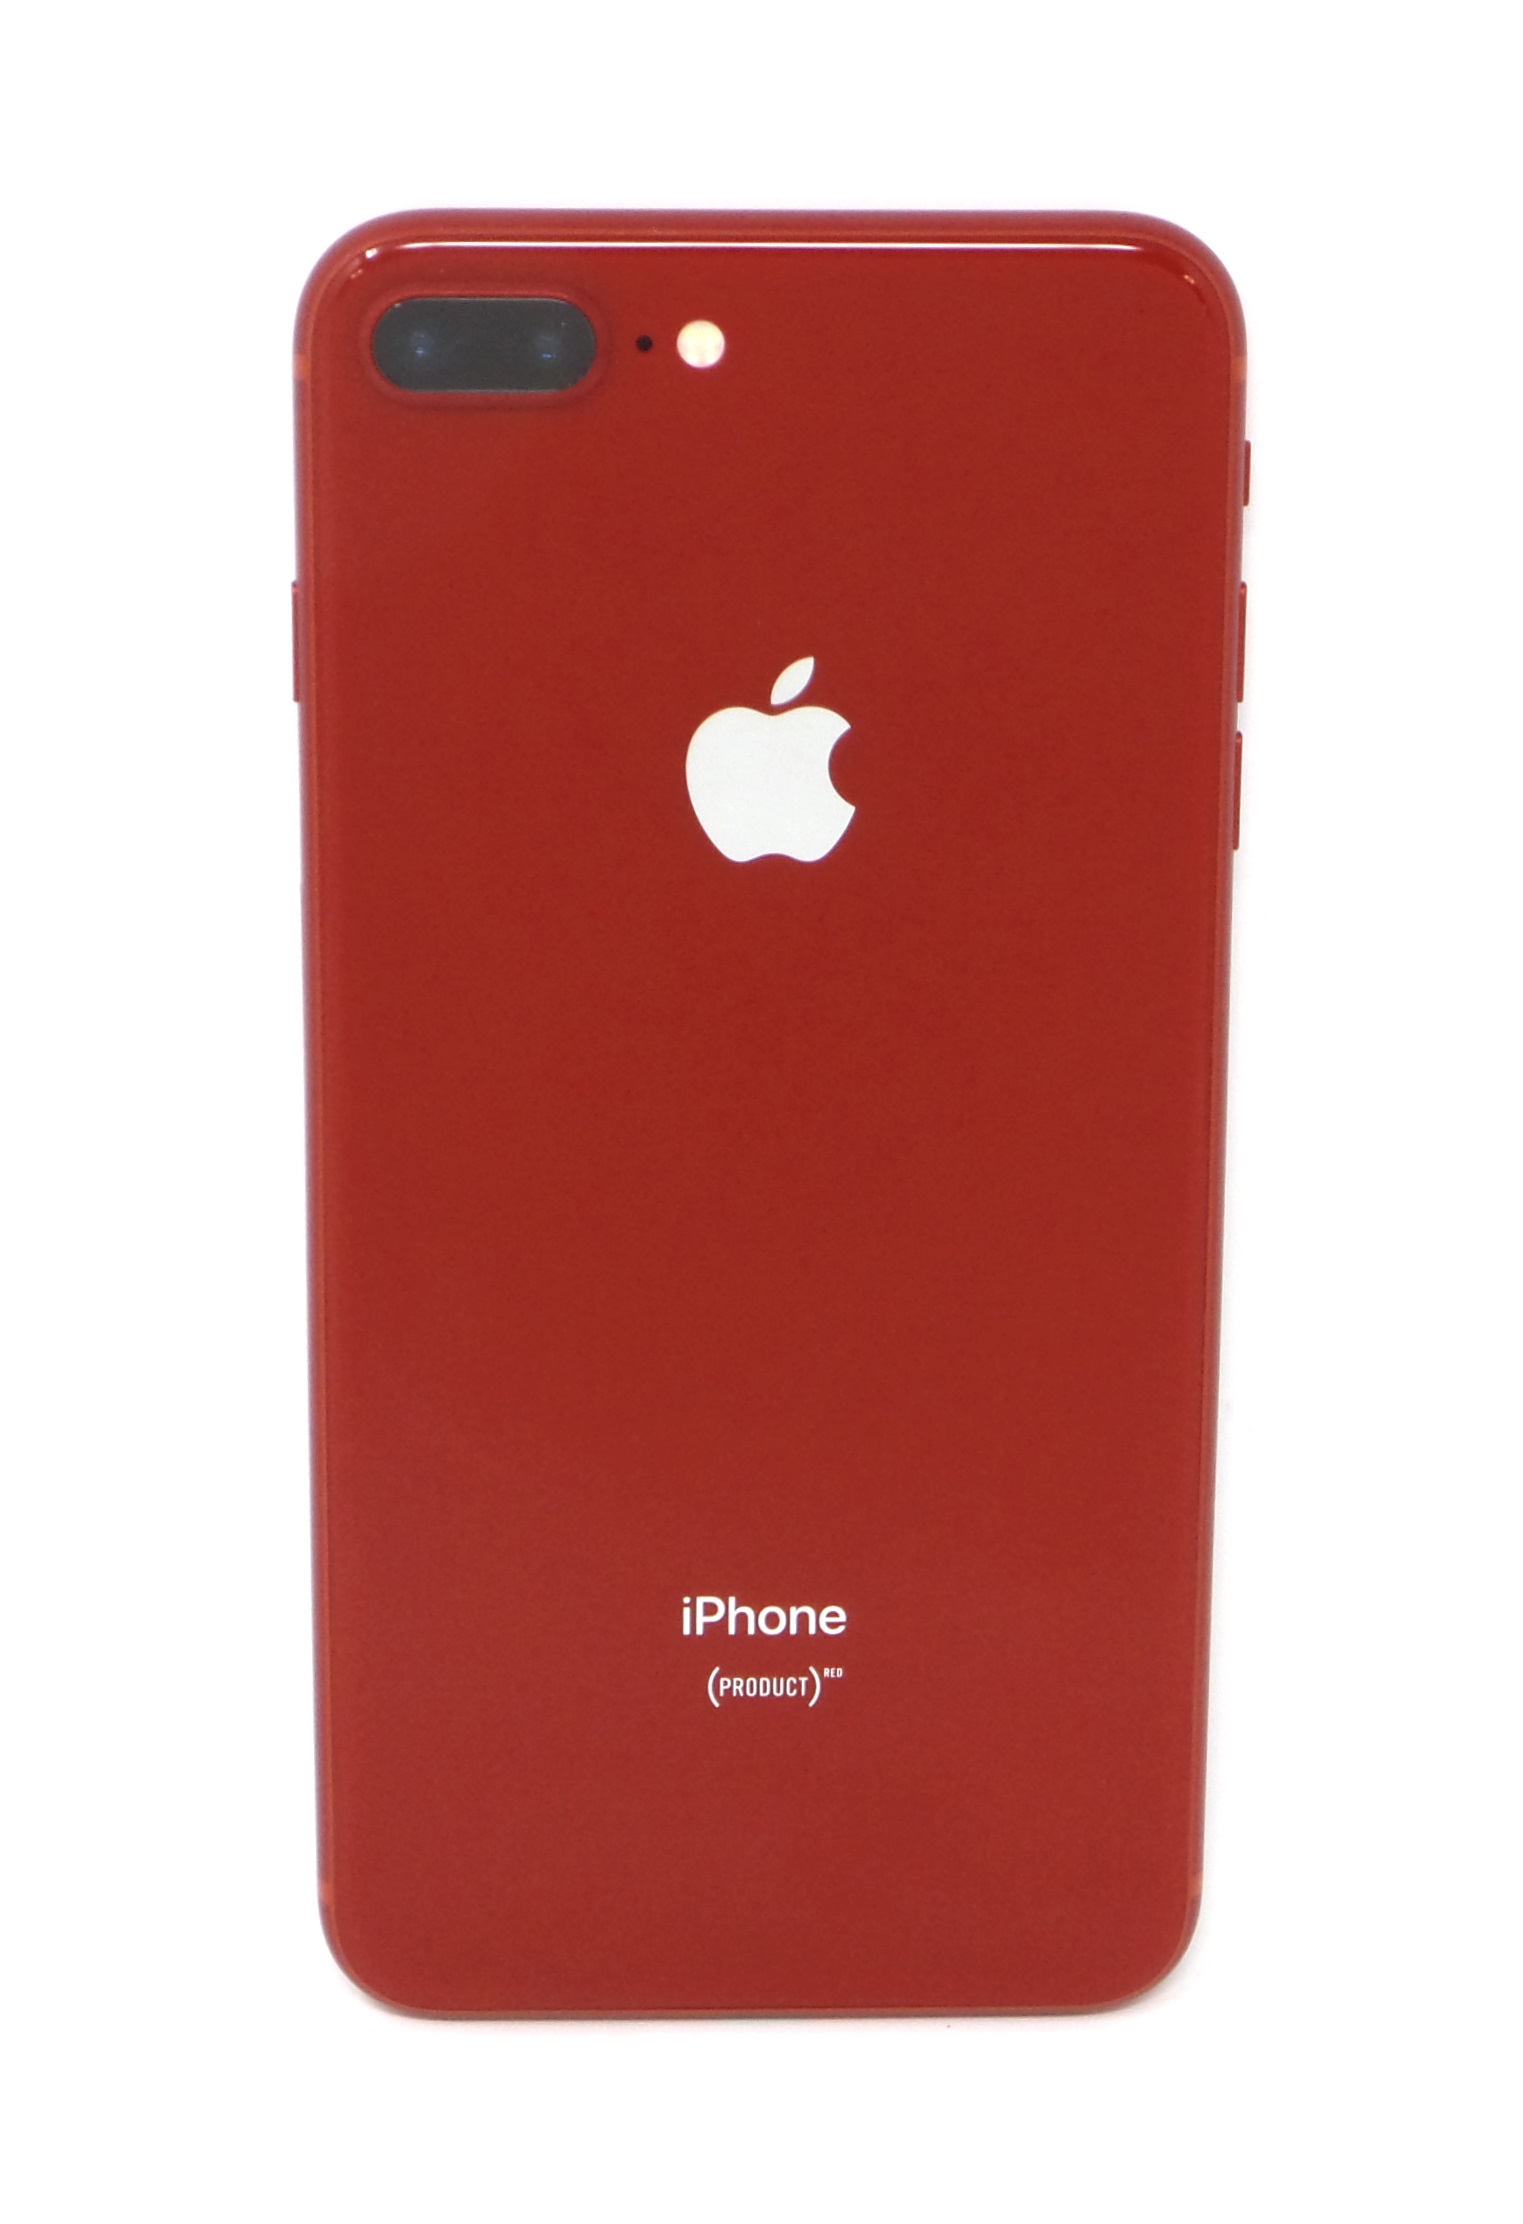 iPhone 8 Plus Product Red $530 Unlocked and 100% Tested